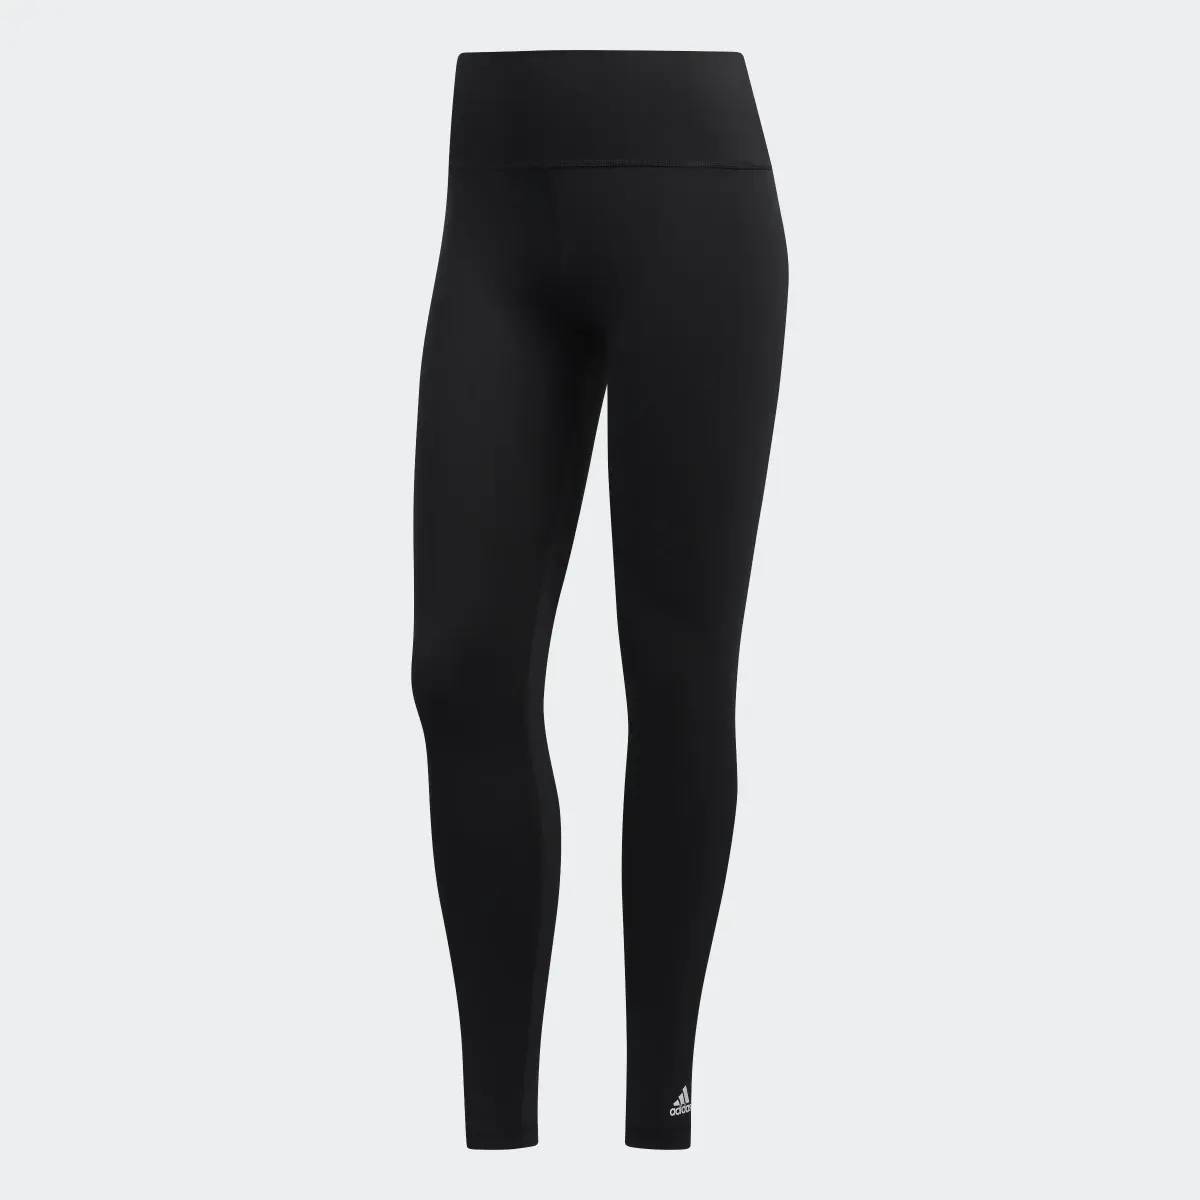 Adidas Believe This 2.0 Long Tights. 1